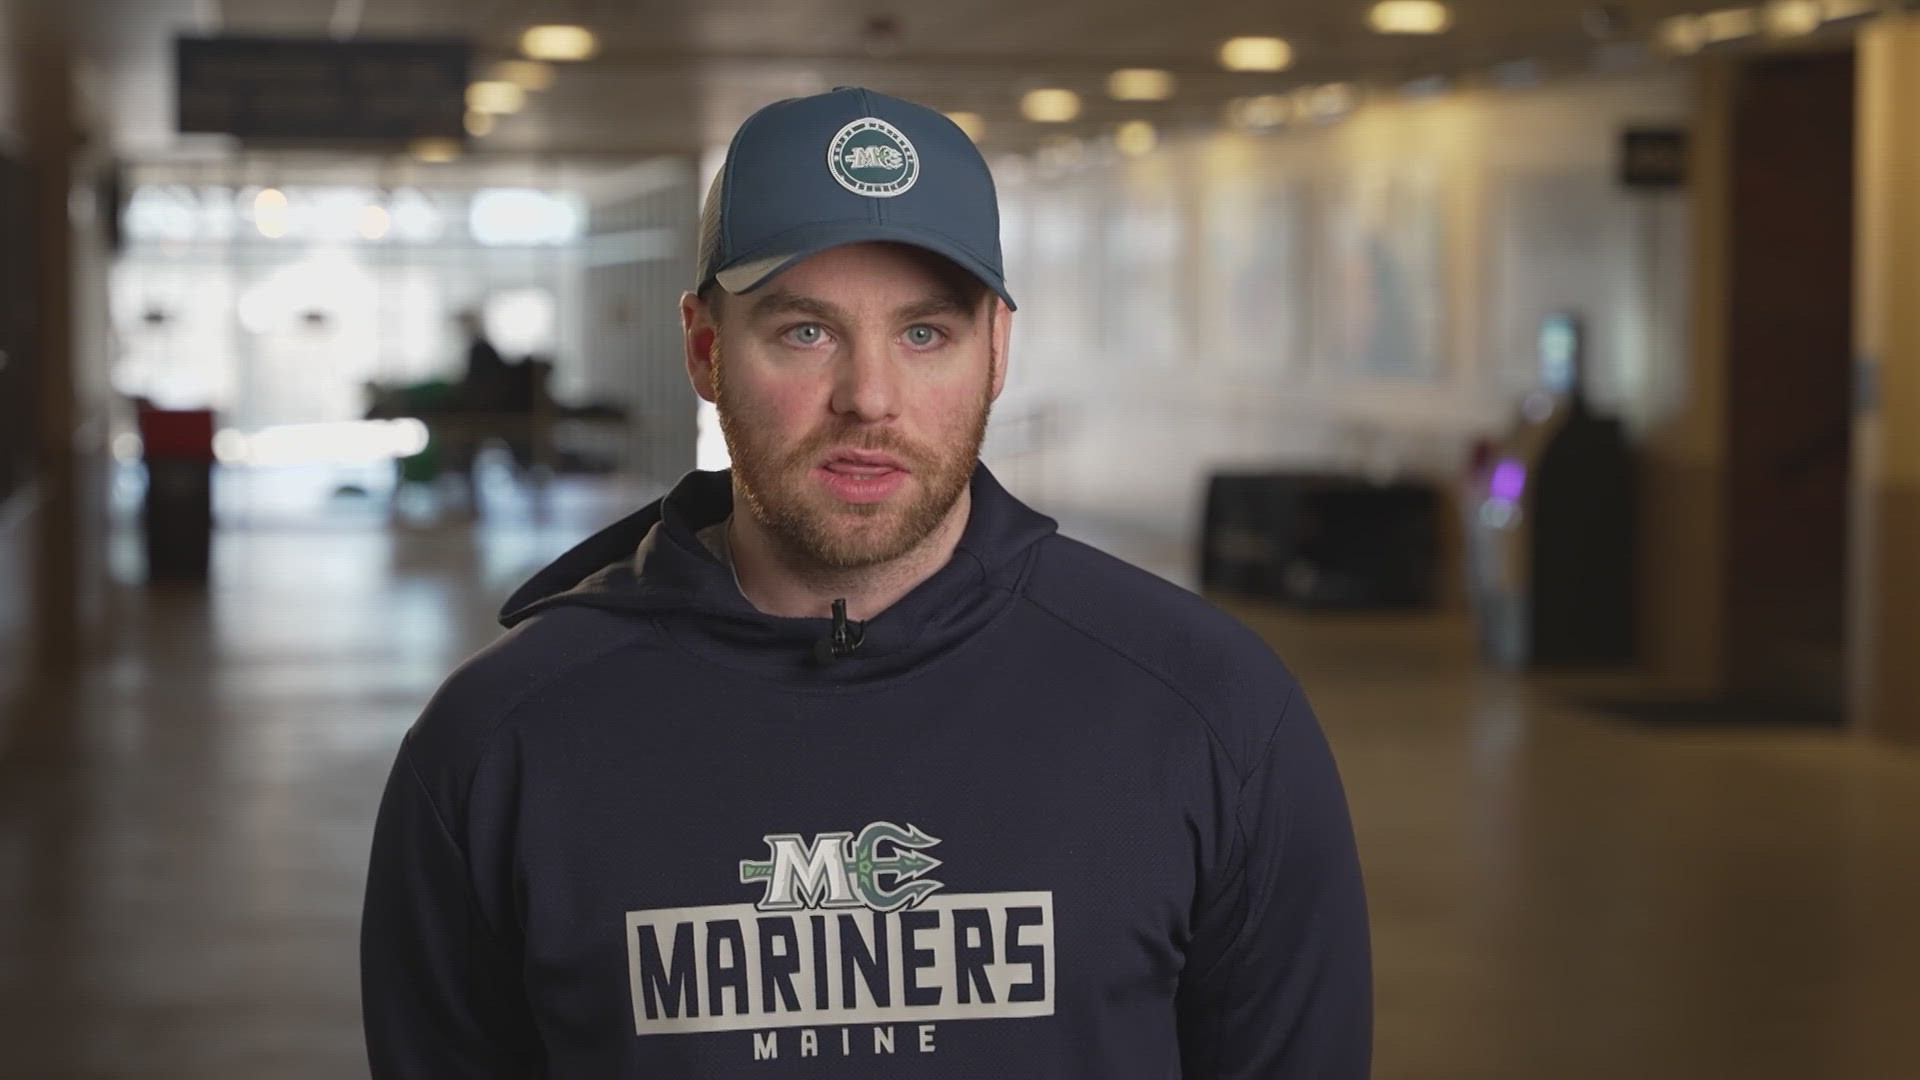 It's our "Let's Talk About It Night" with the Maine Mariners. It's a mission shared with the team.